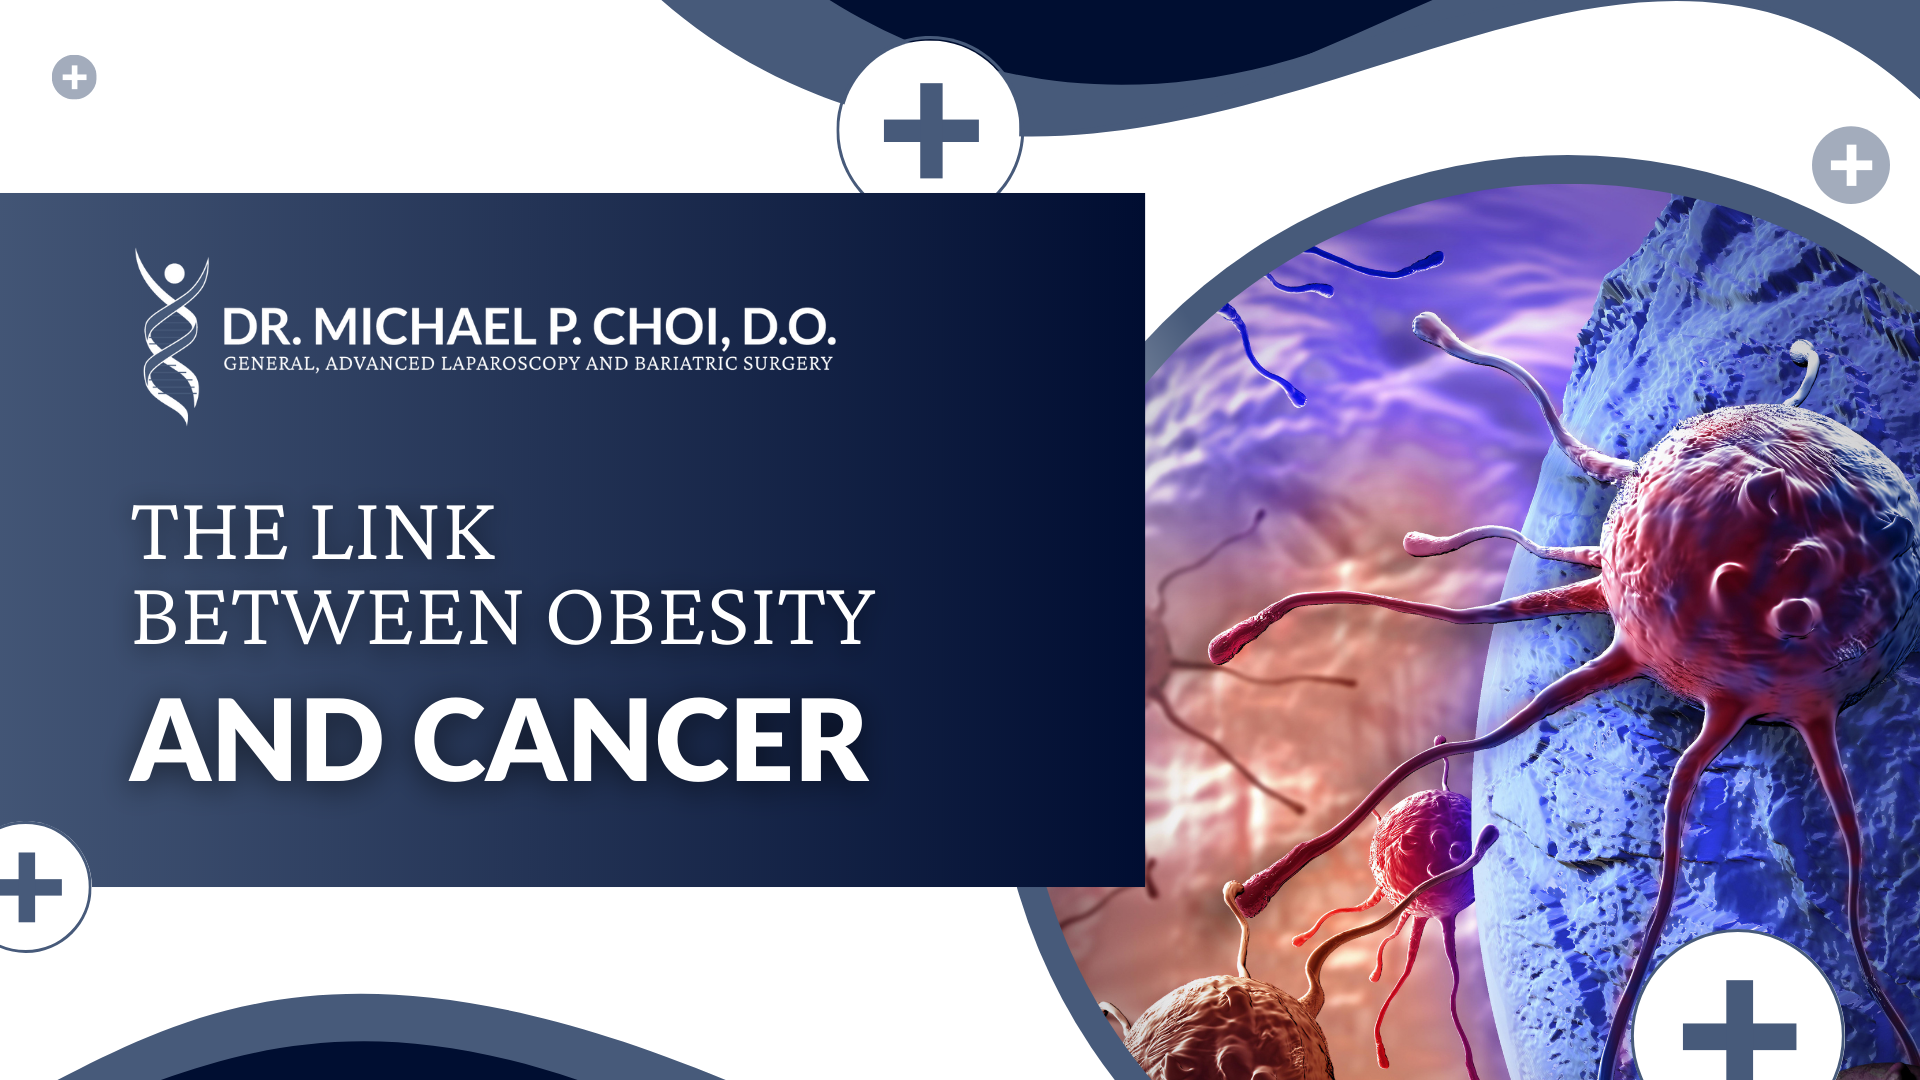 THE LINK BETWEEN OBESITY AND CANCER